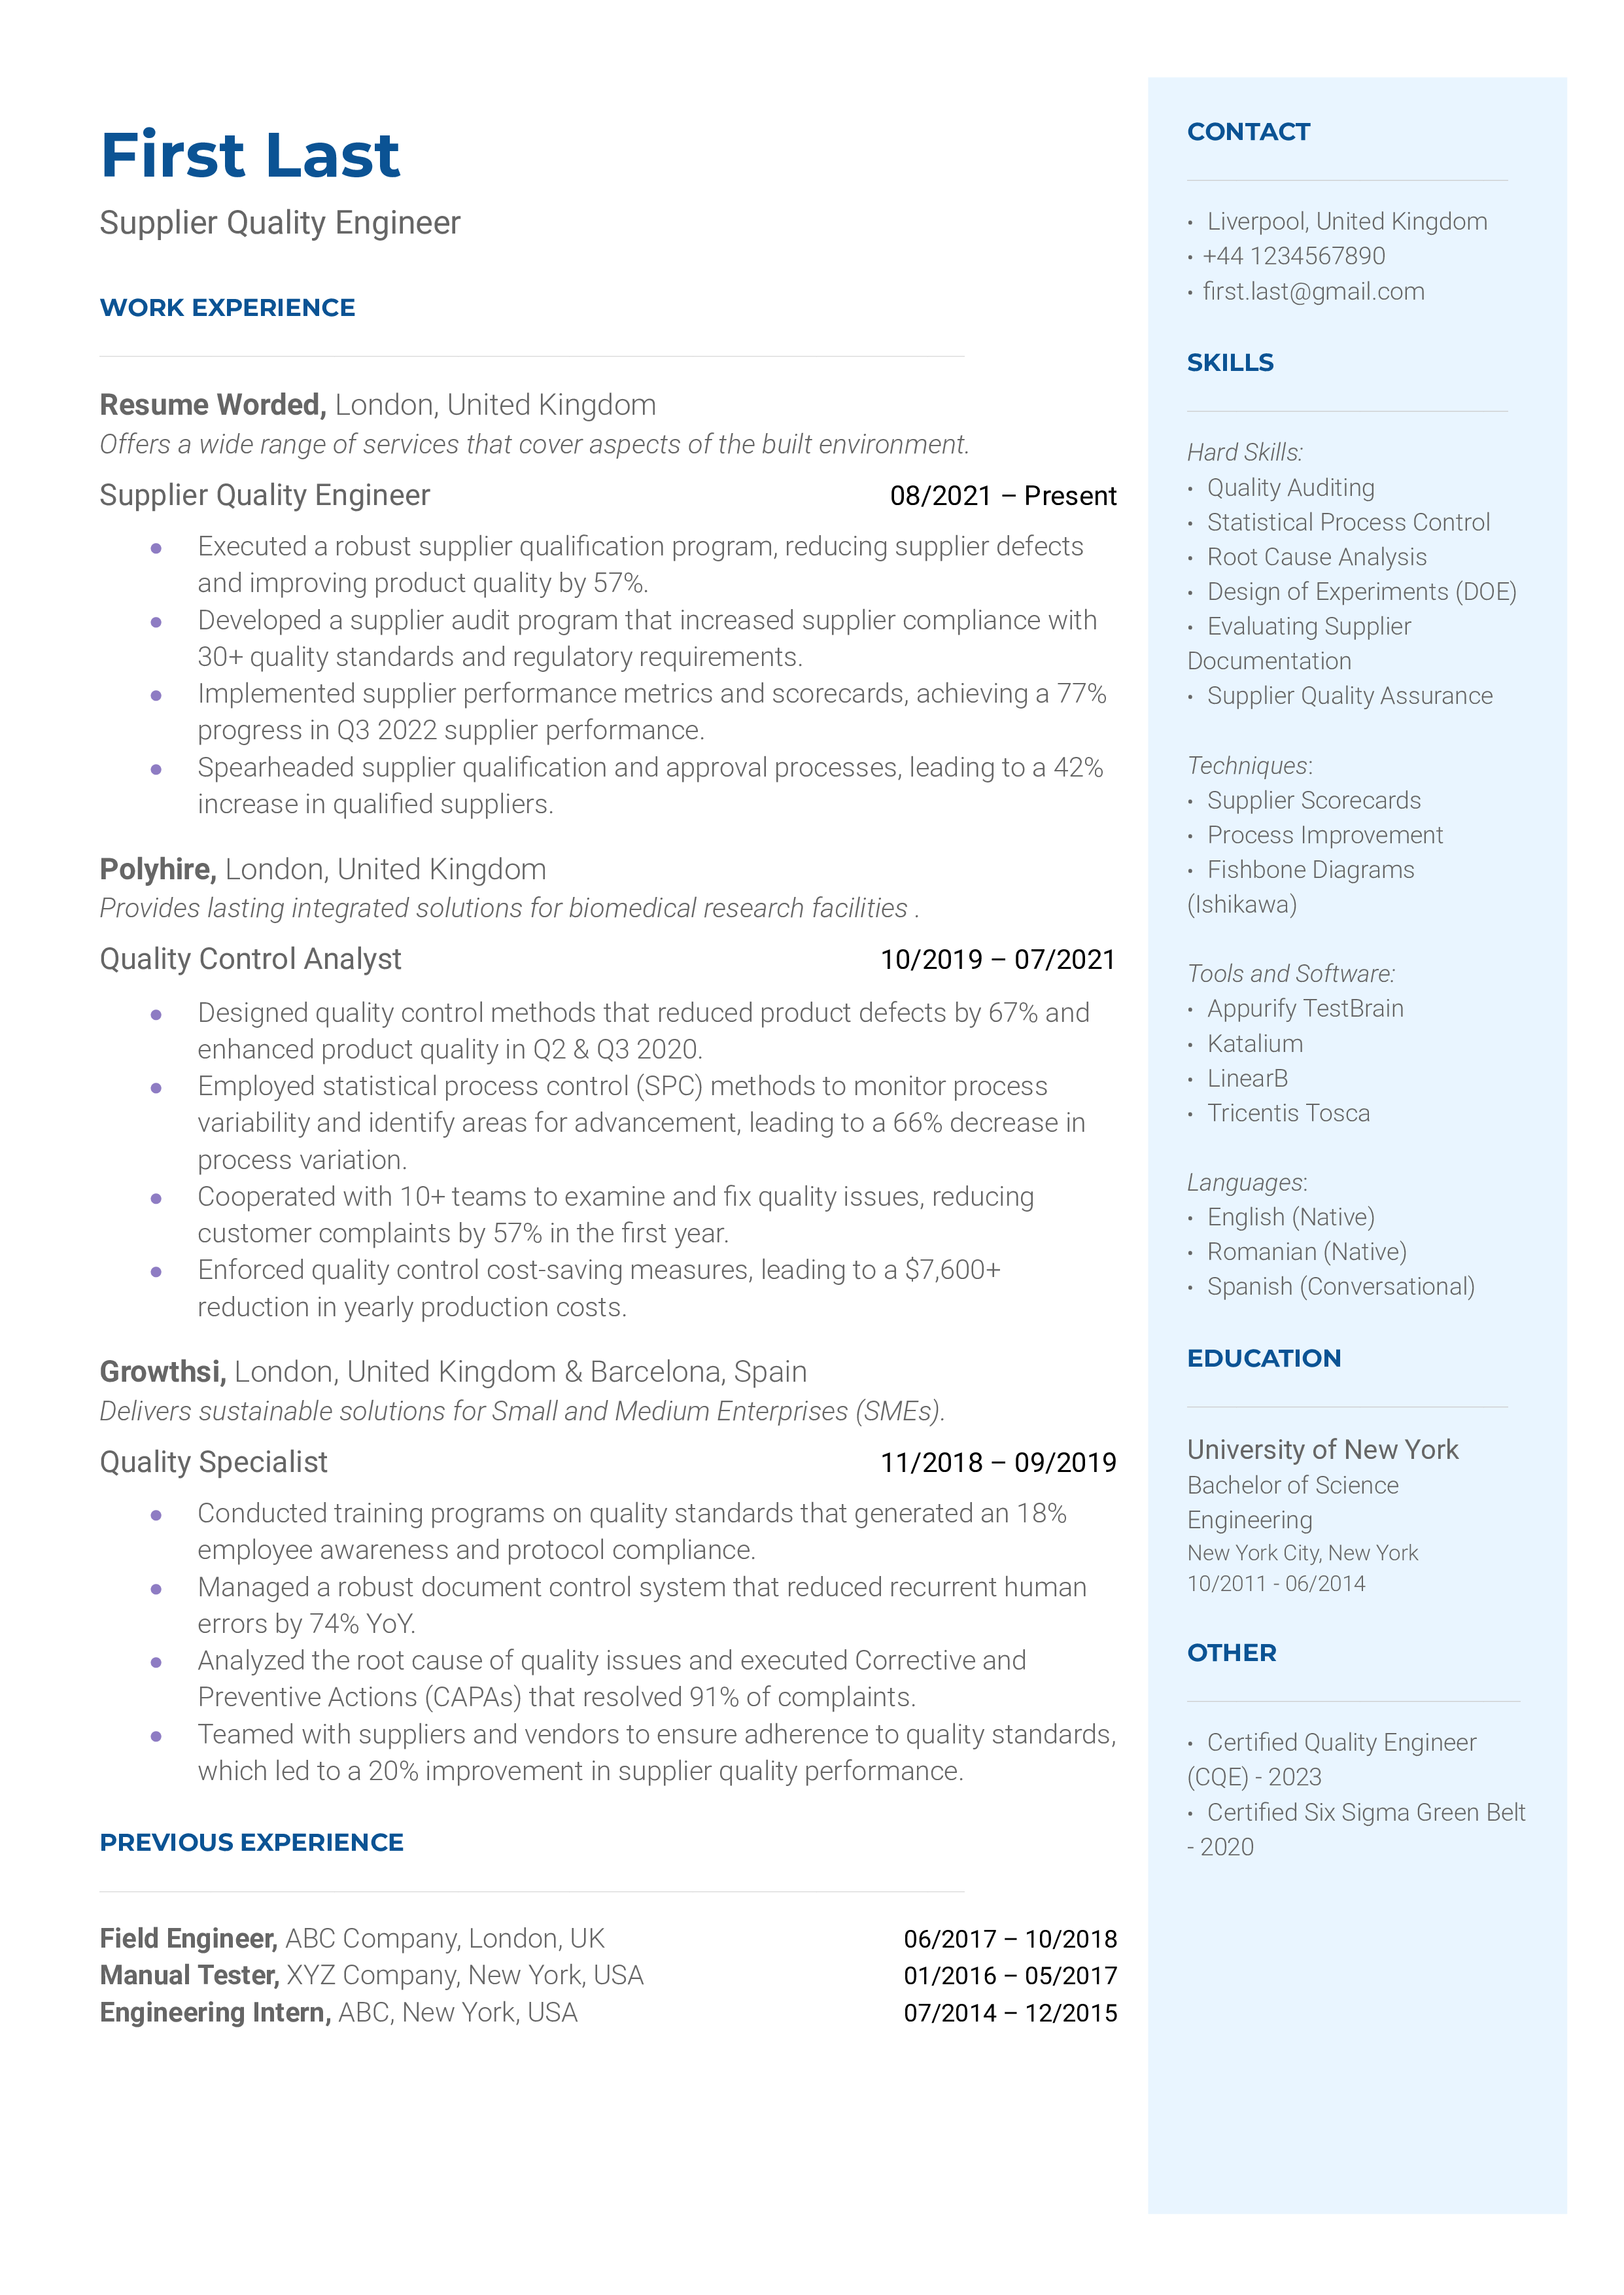 A resume for a Supplier Quality Engineer focusing on industry-specific experience and data analysis skills.